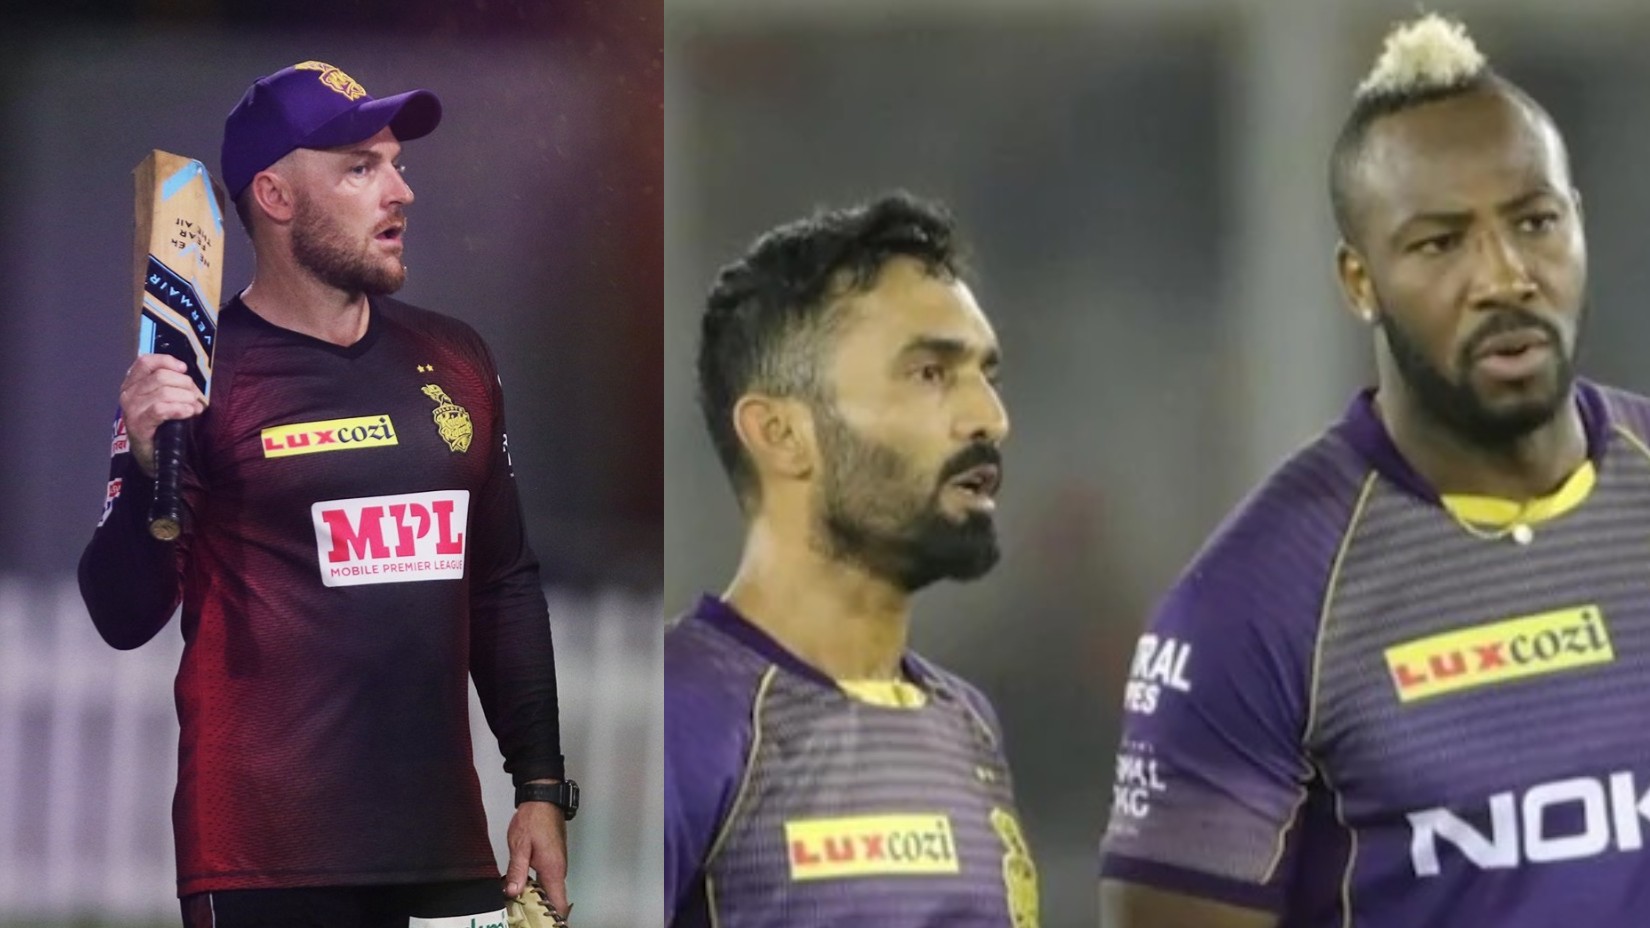 IPL 2020: Karthik to oversee Russell’s workload on the field, says KKR coach Brendon McCullum